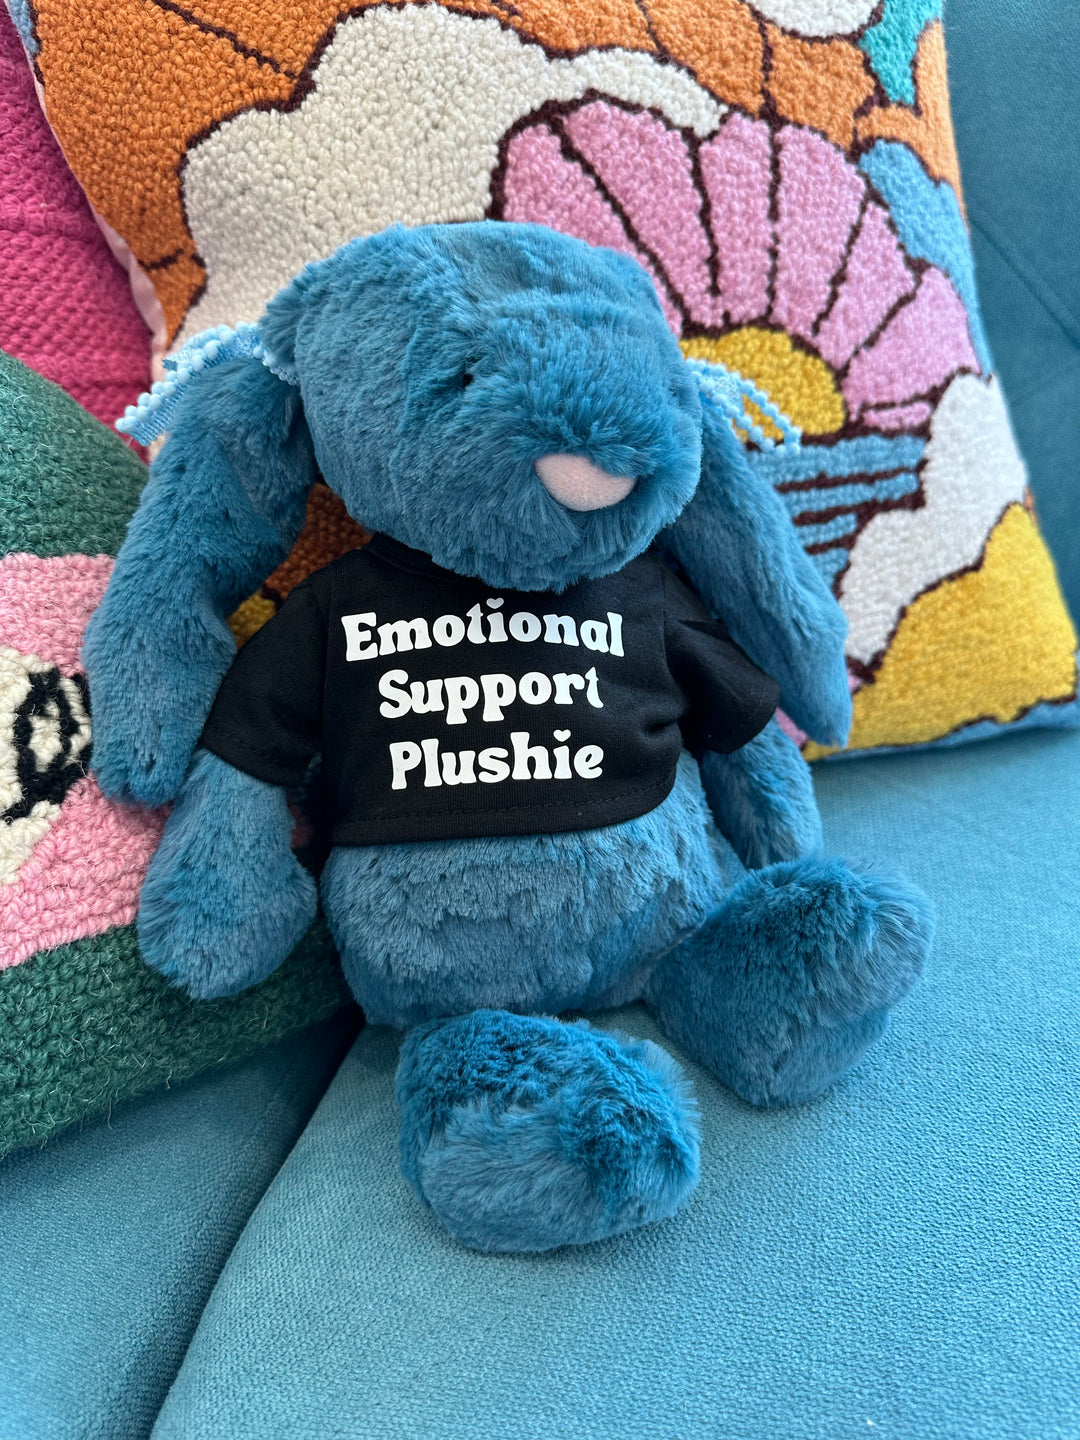 Emotional Support Plushie Jelly Shirt